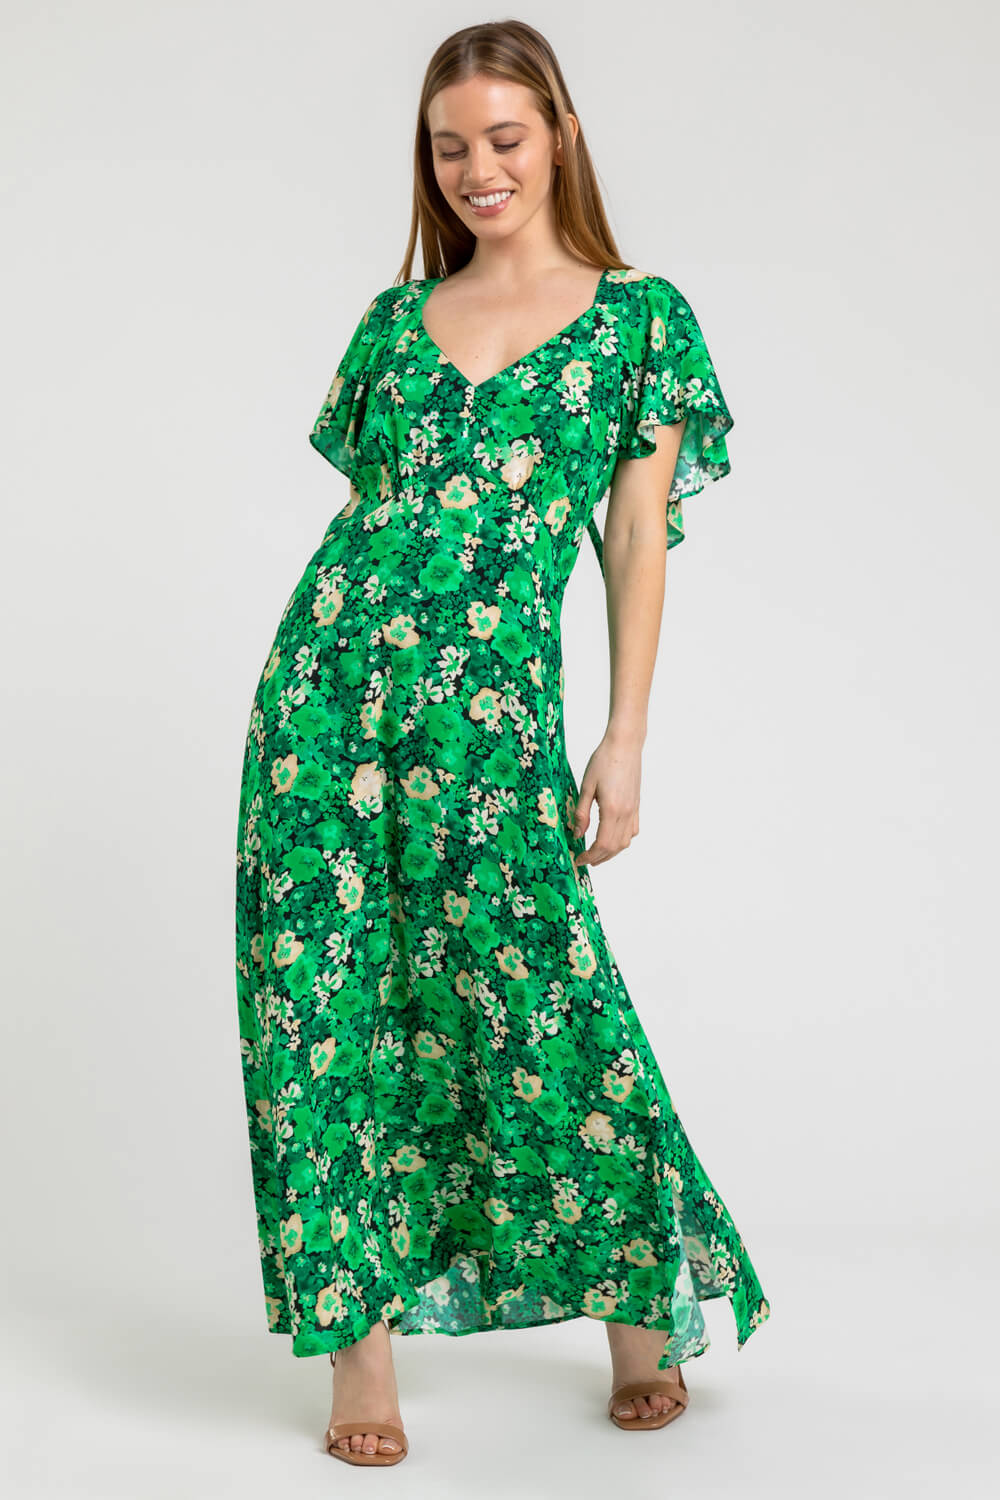 Green Petite Ditsy Floral Print Maxi Dress, Image 3 of 5